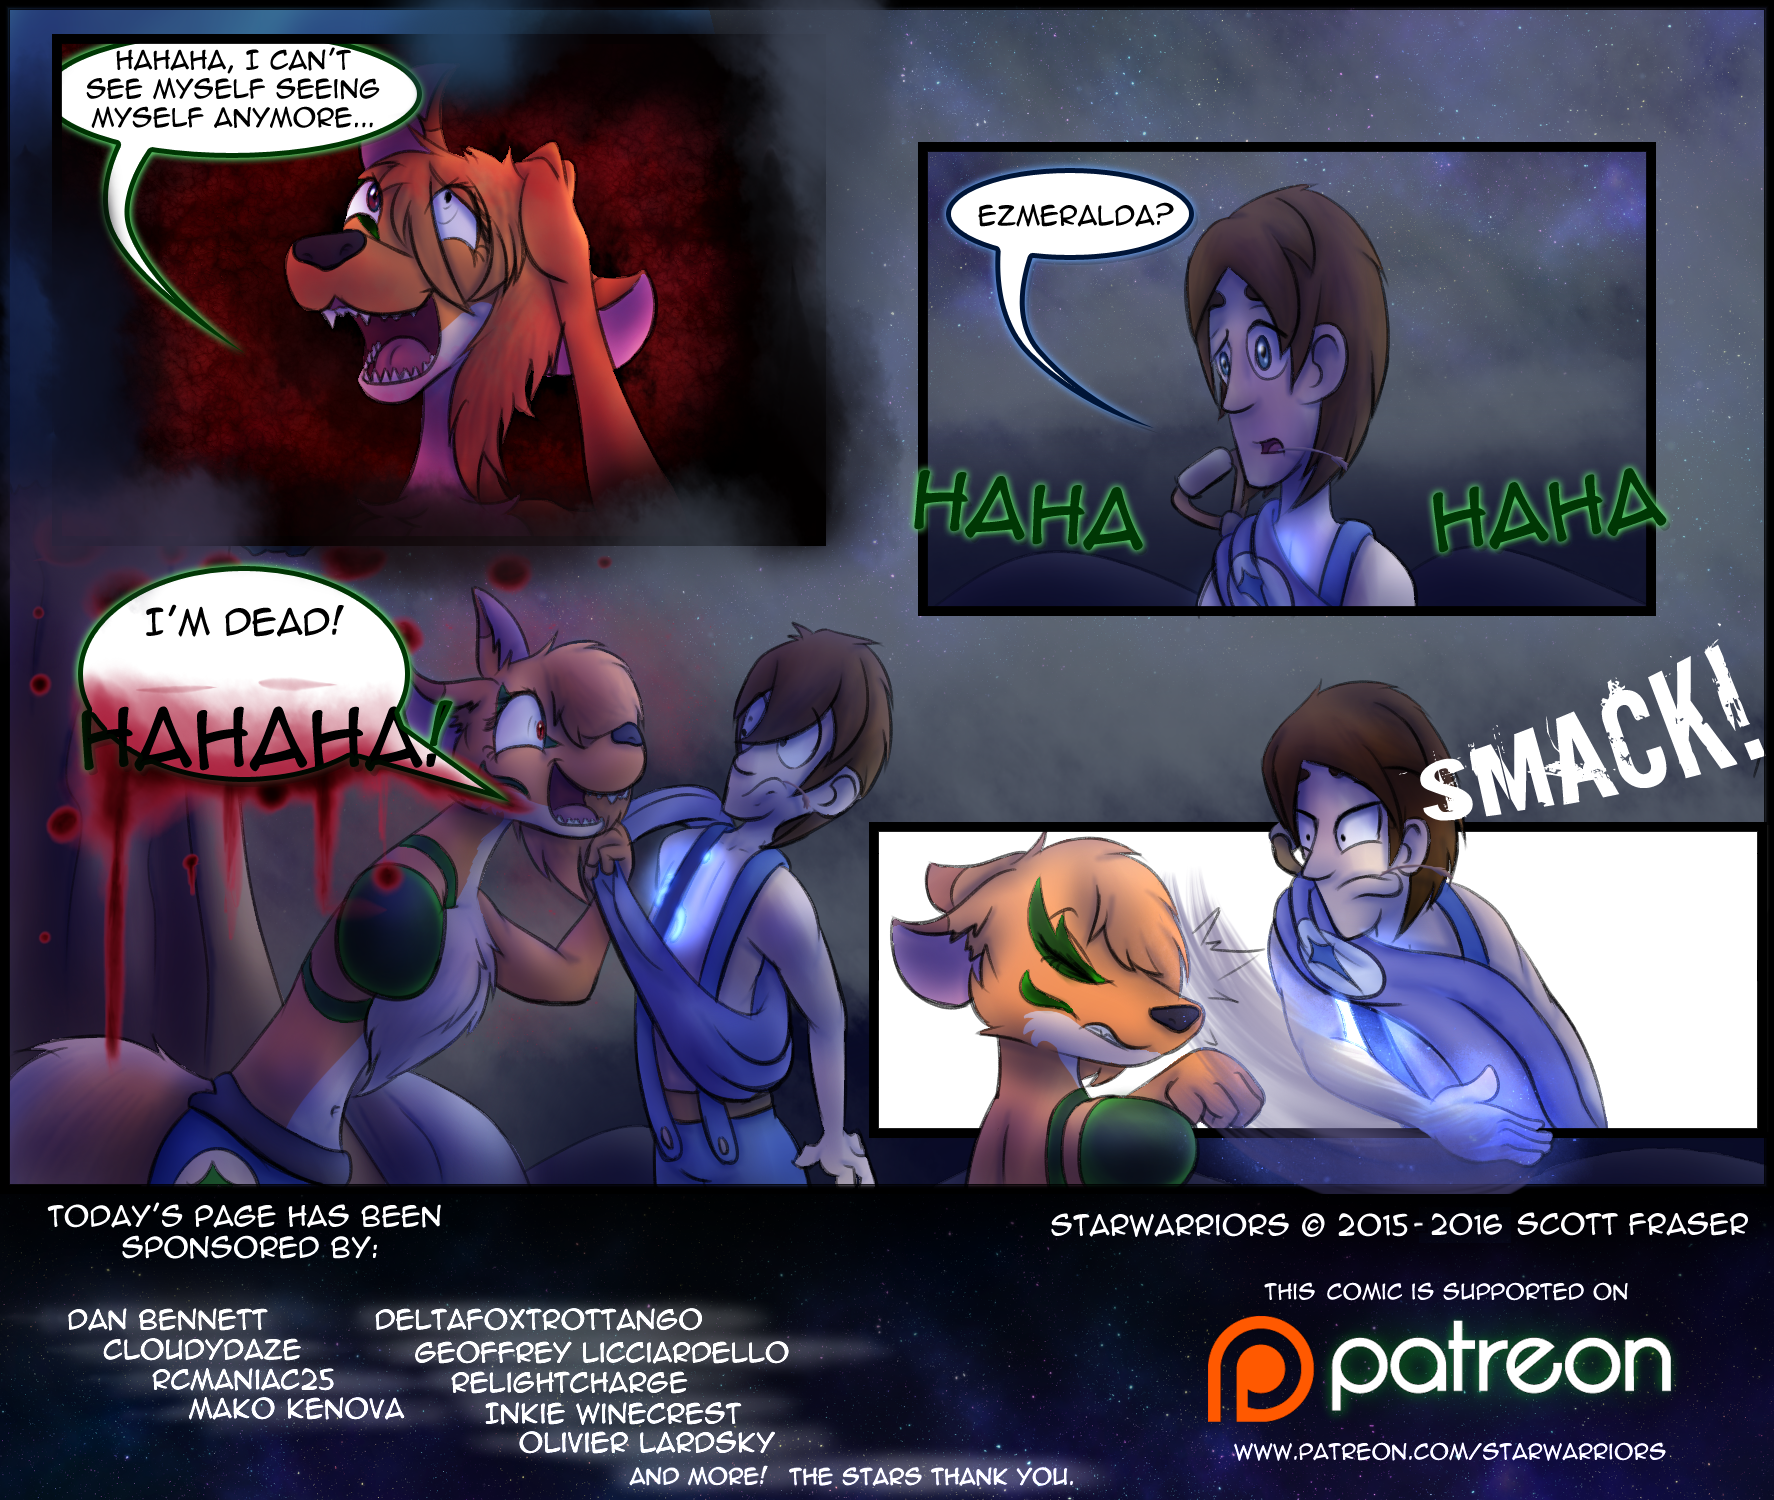 Ch2 Page 7 – Snap Out of it